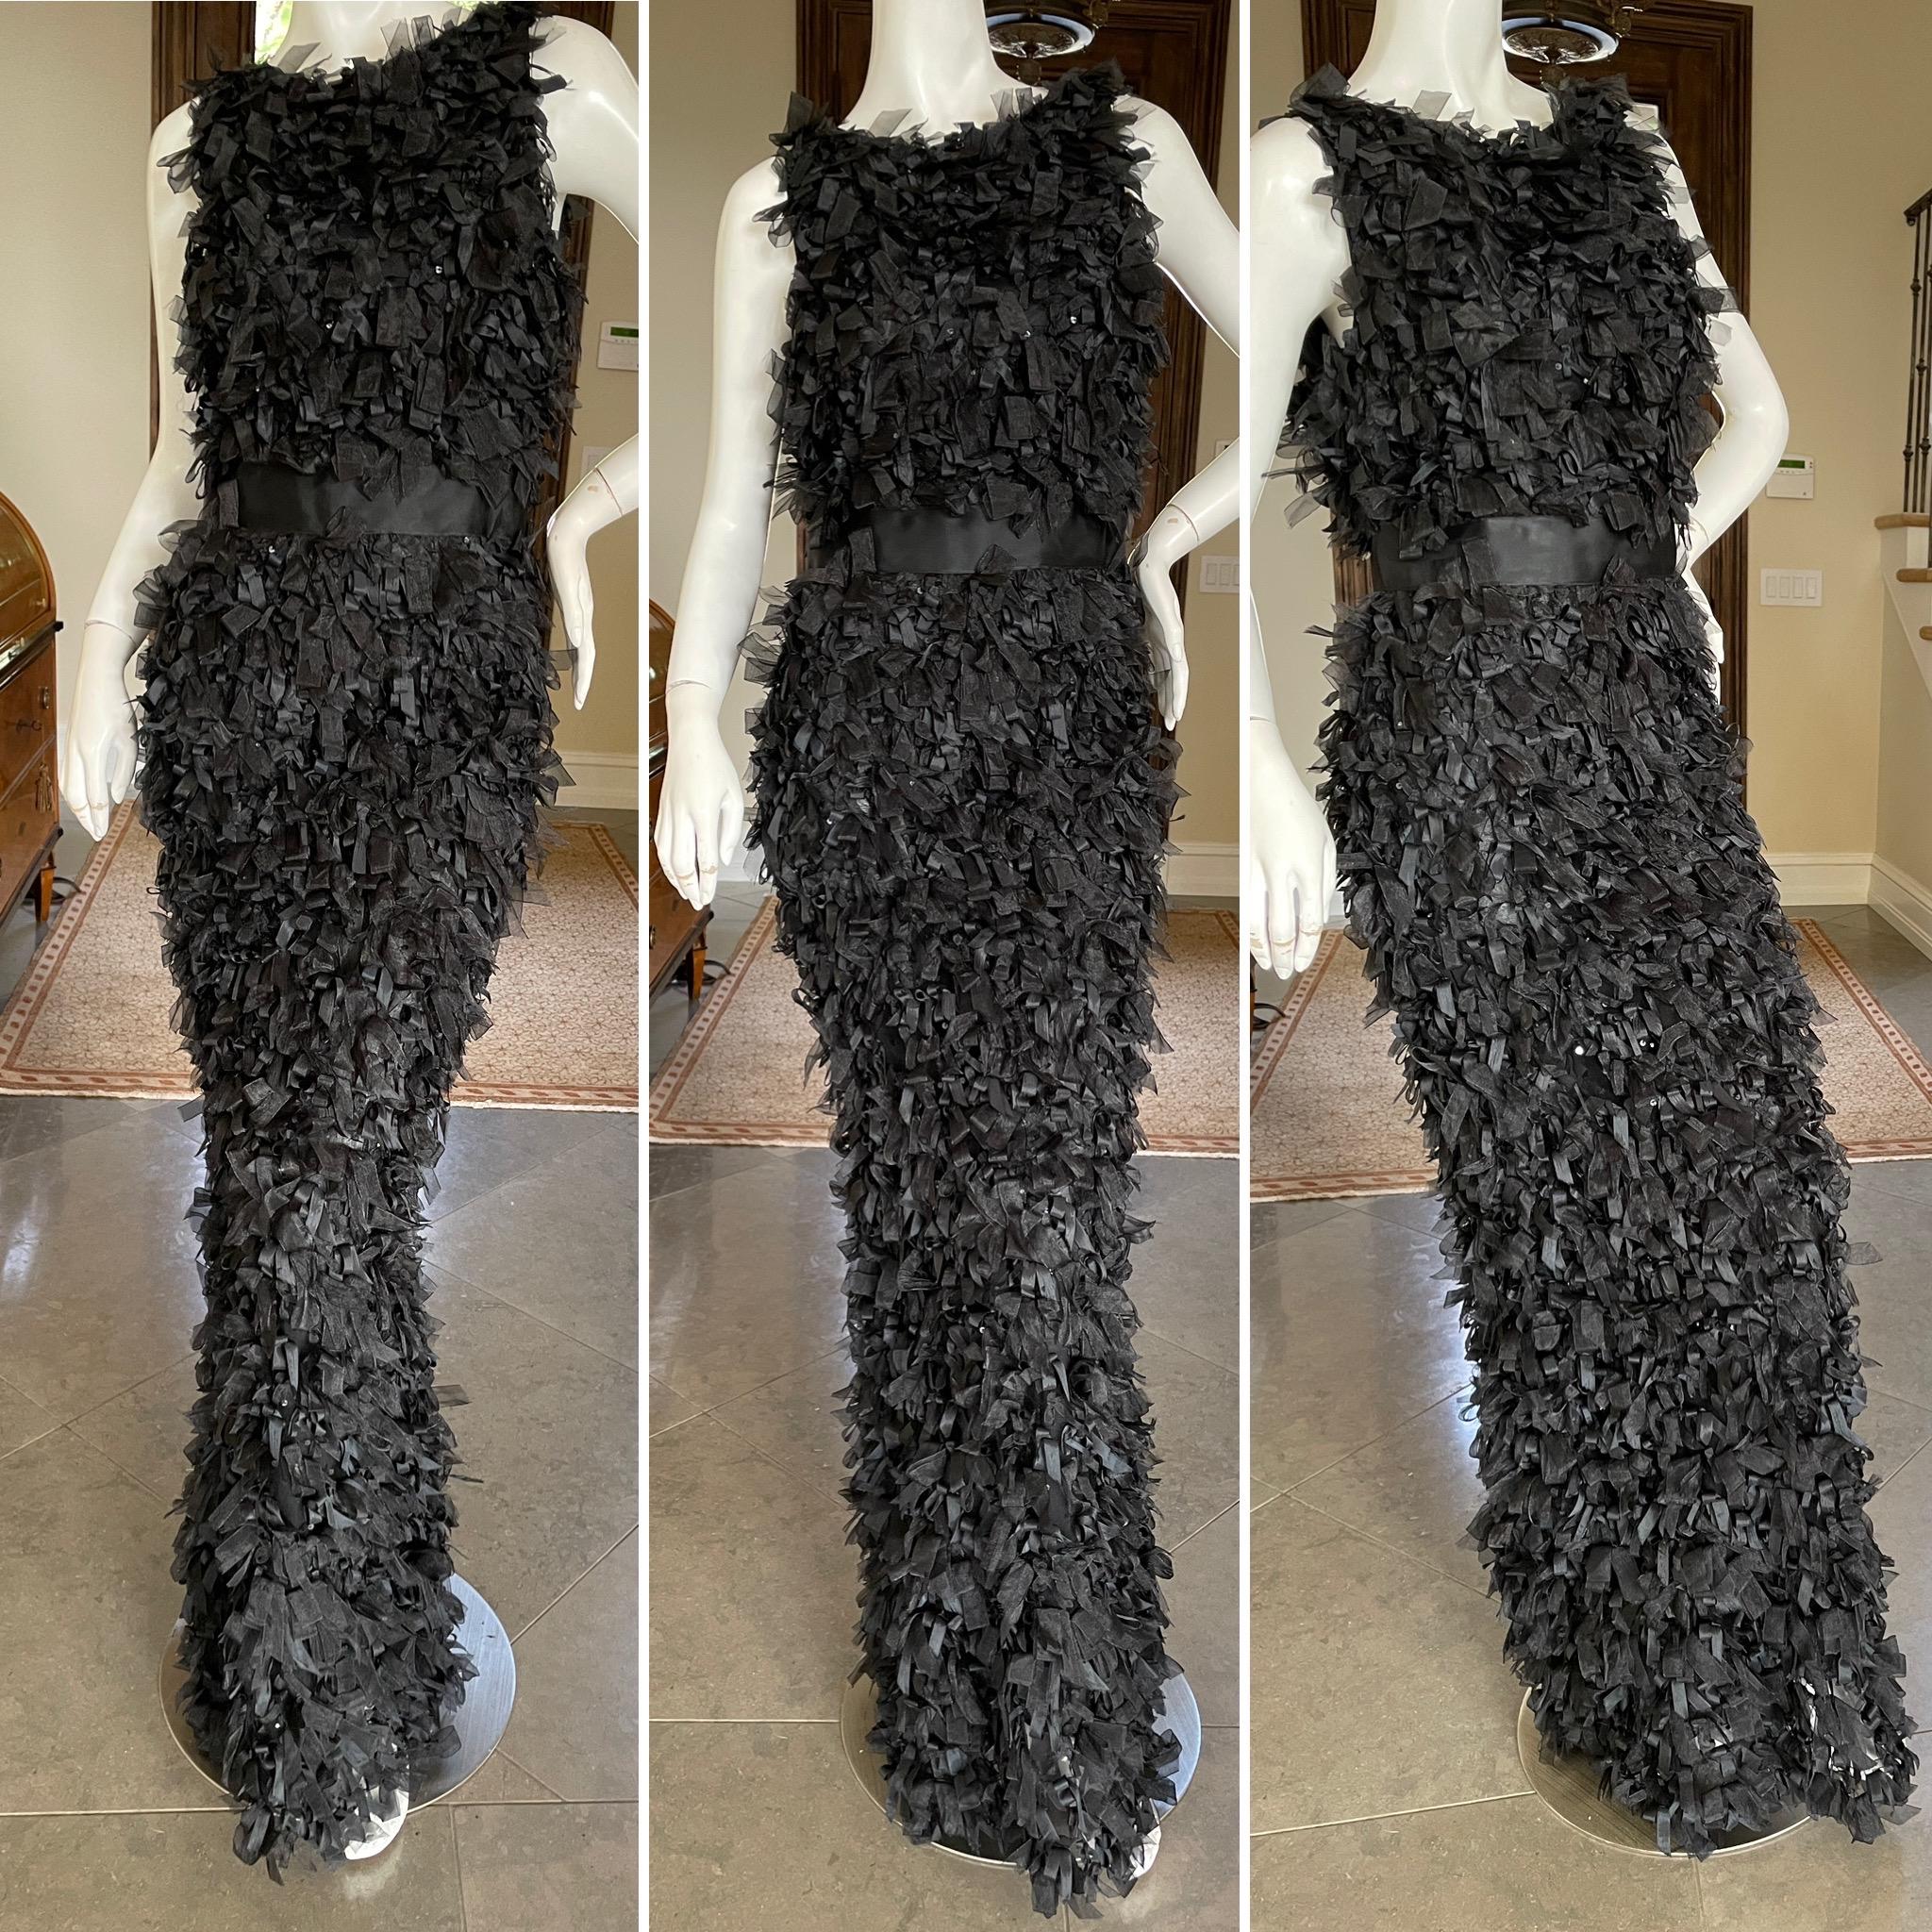 Oscar de la Renta Vintage Sleeveless Black Fringed Evening Dress
Stunning. Please use the zoom feature to see all the details.
 Size 10
Bust 40